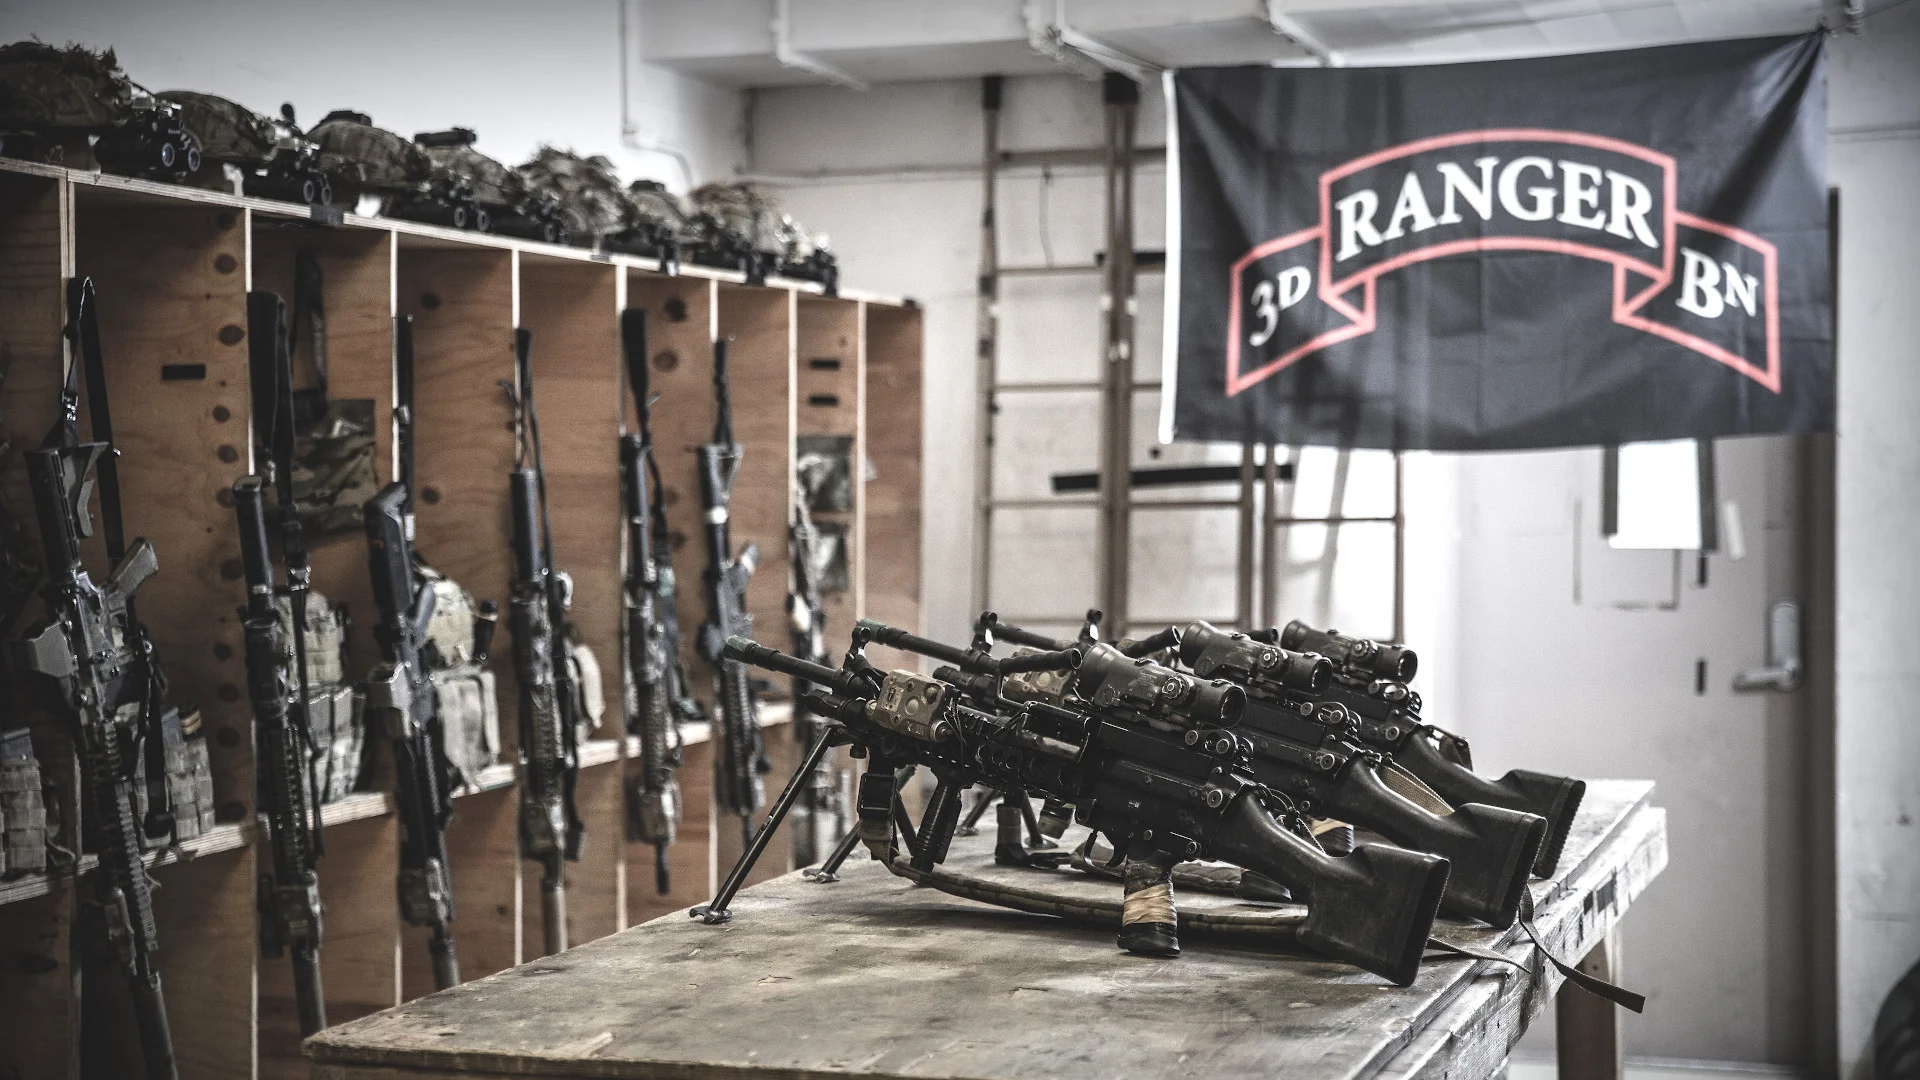 1920x1080 Take A Rare Look Inside An Army Ranger Armory Somewhere In Afghanista